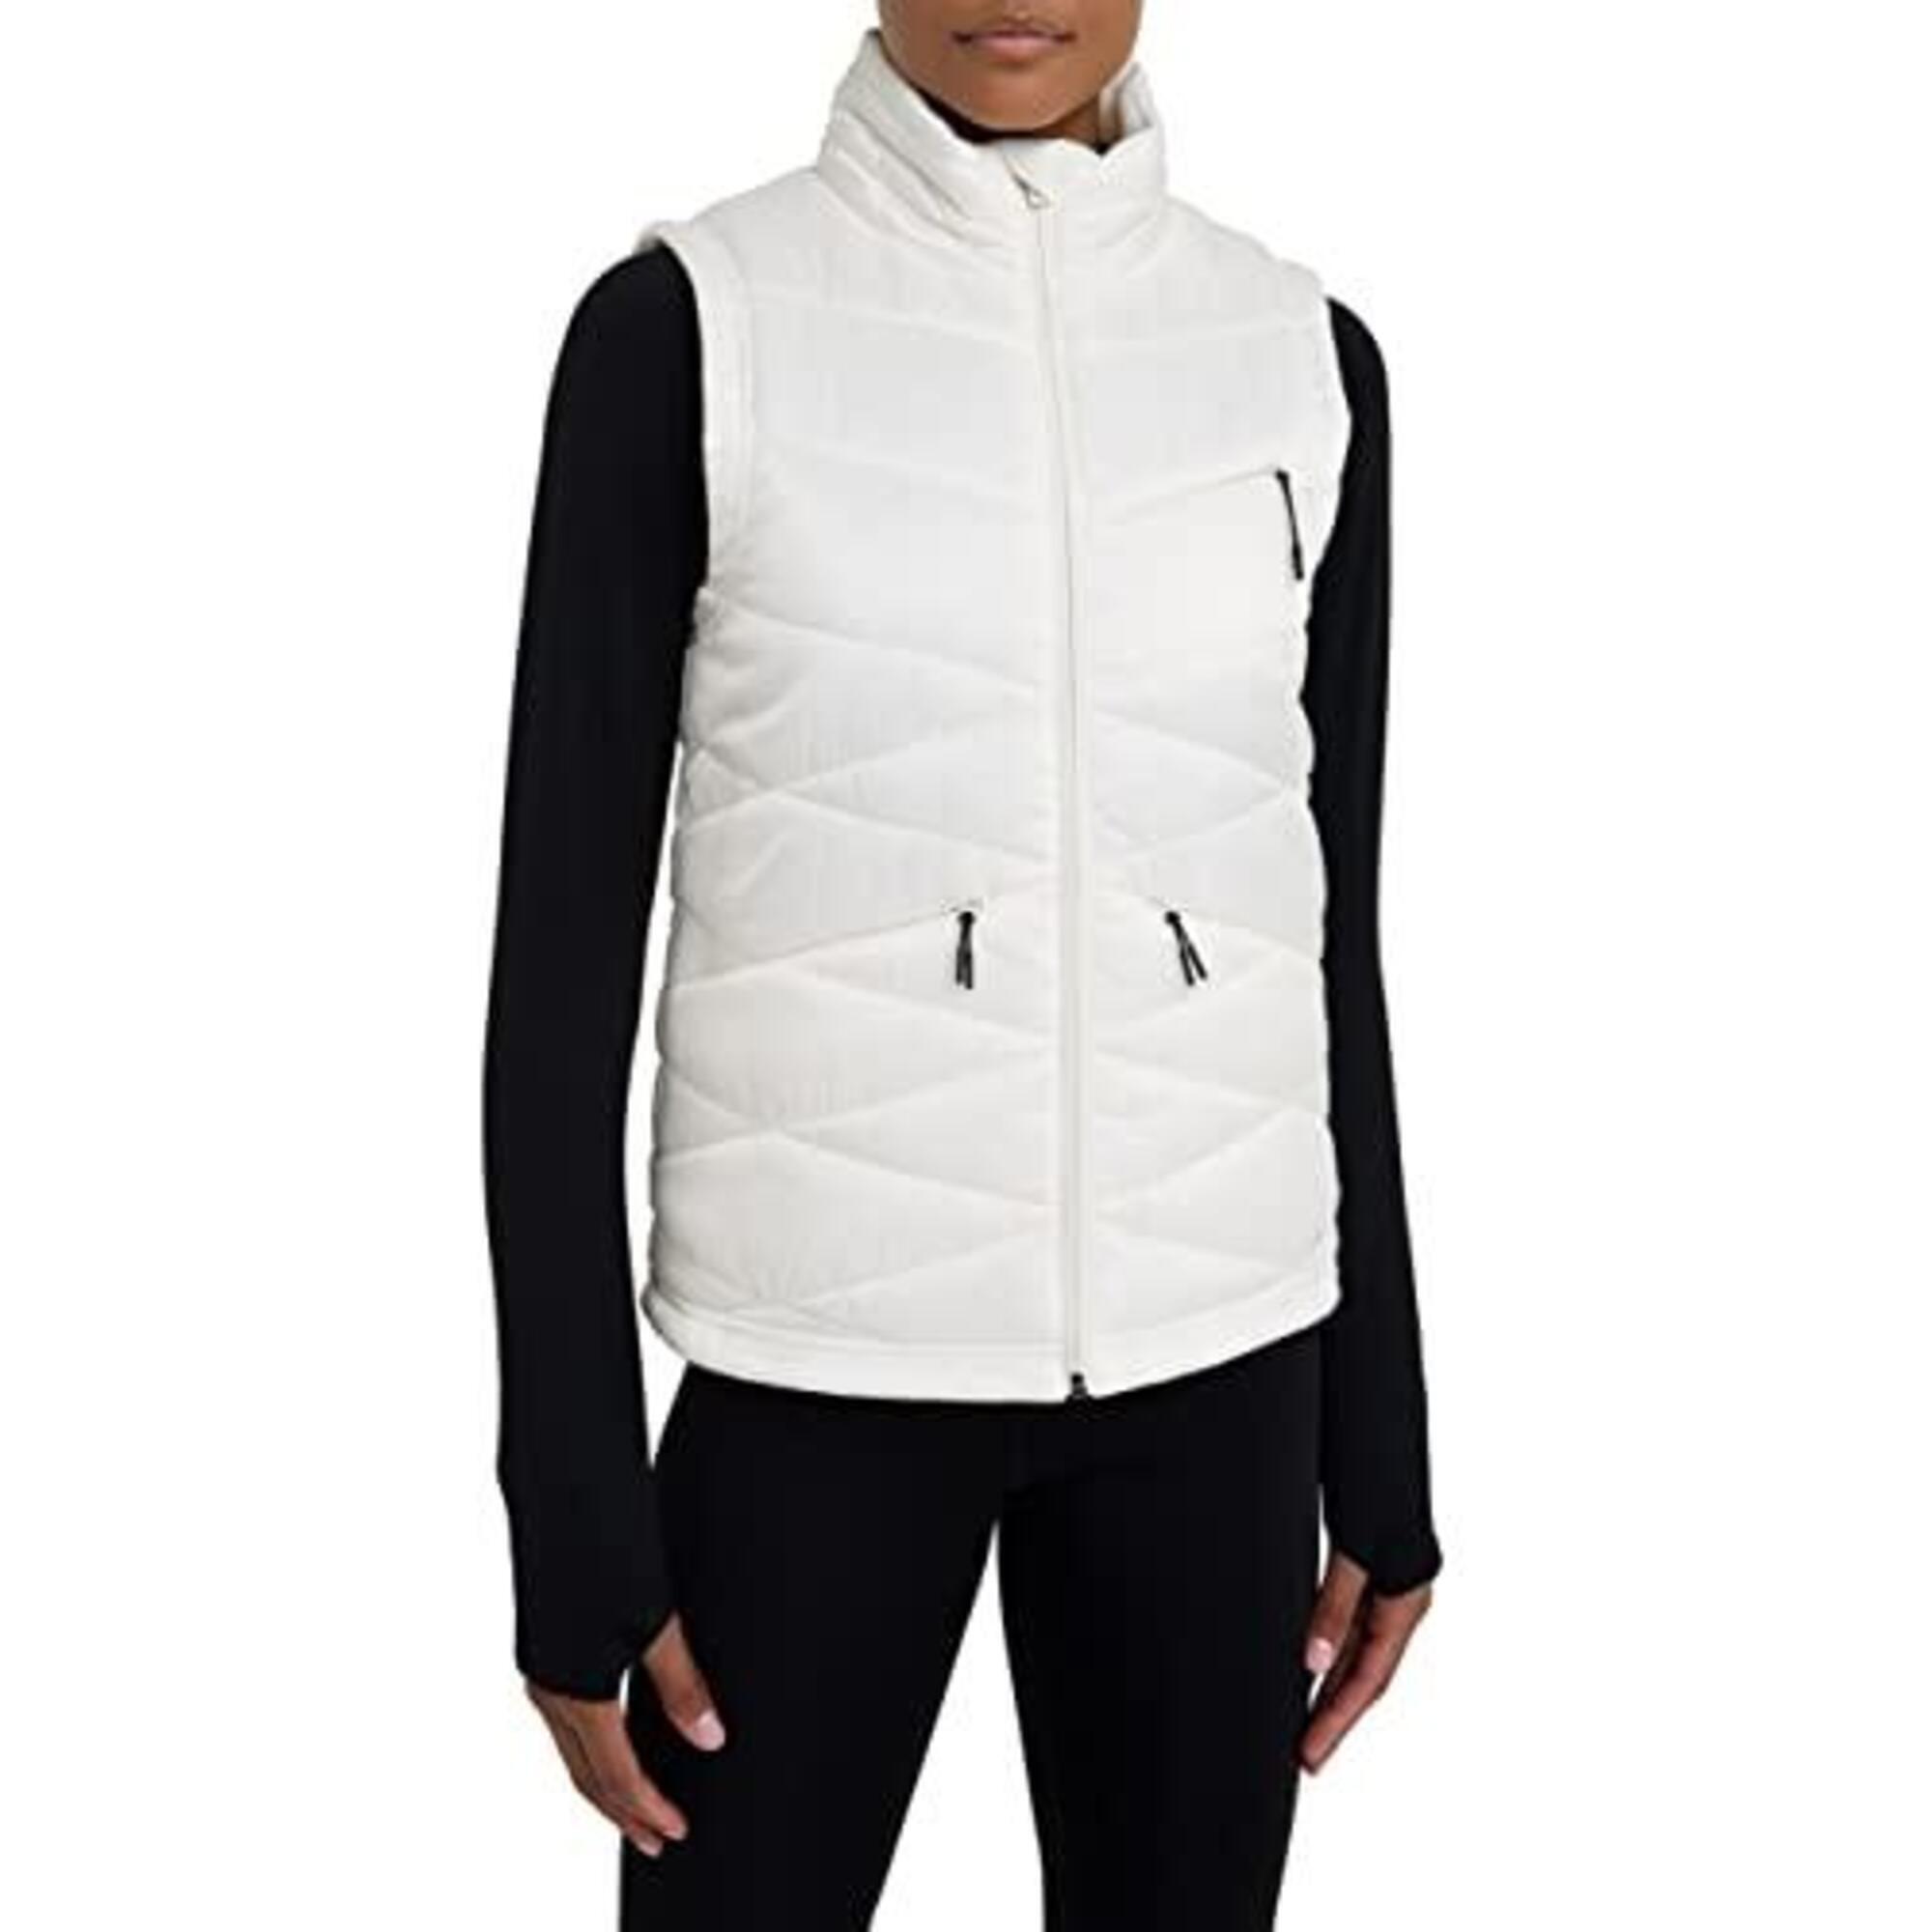 TCA Women's Thermal Cloud Gilet with Zip Pockets - Marshmallow